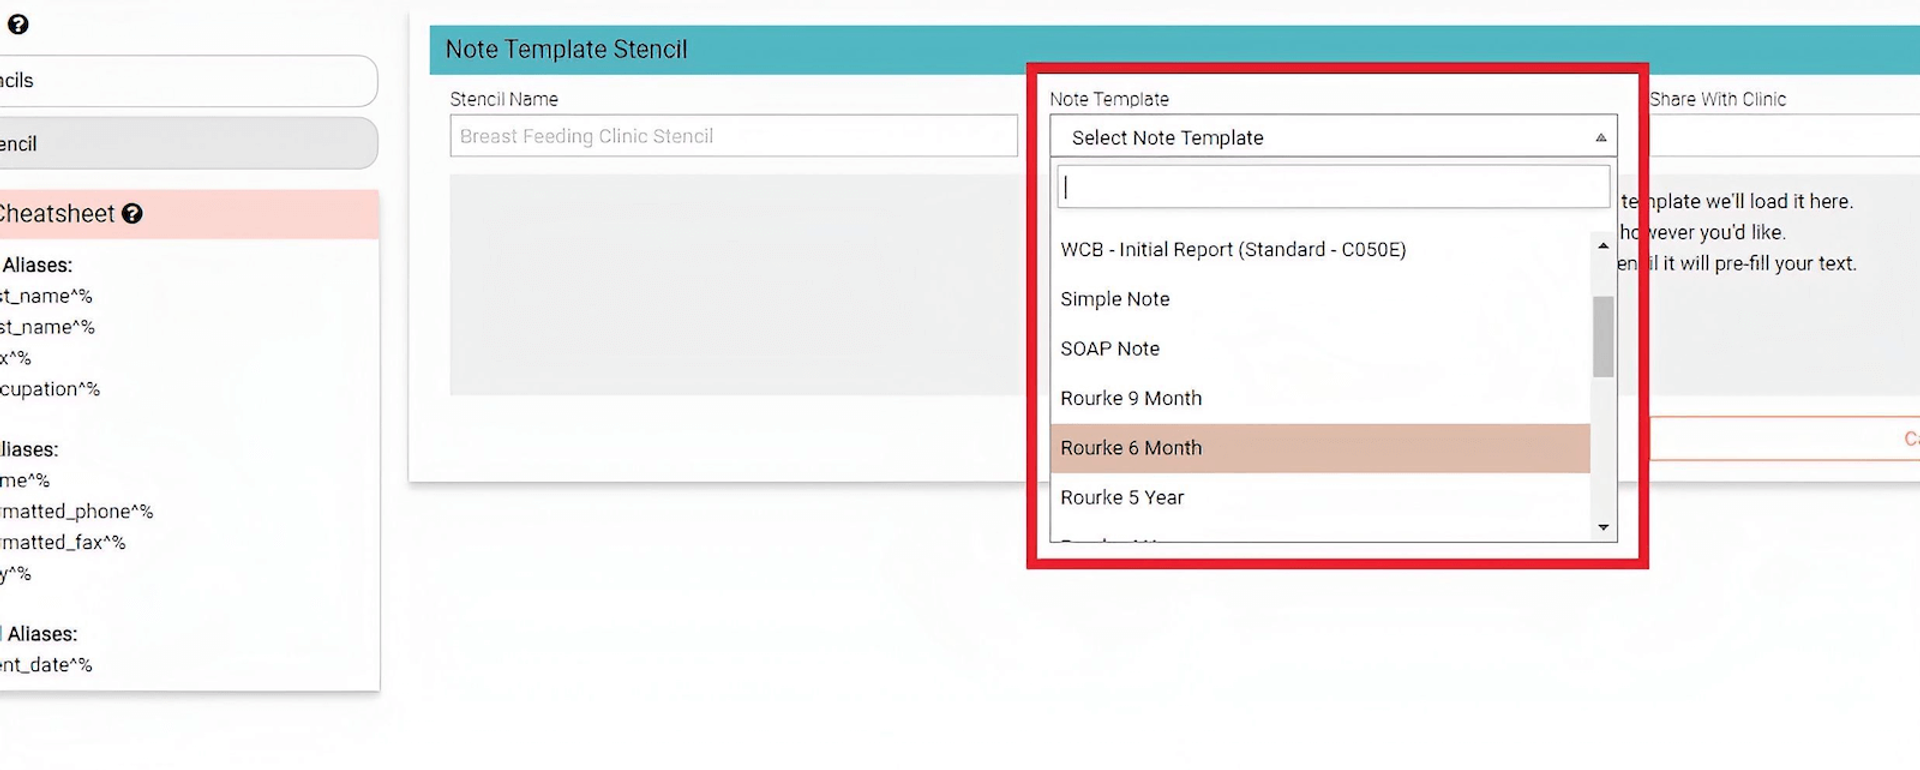 Note Template Stencil workspace with Note Template dropdown visible, displaying several selectable options.